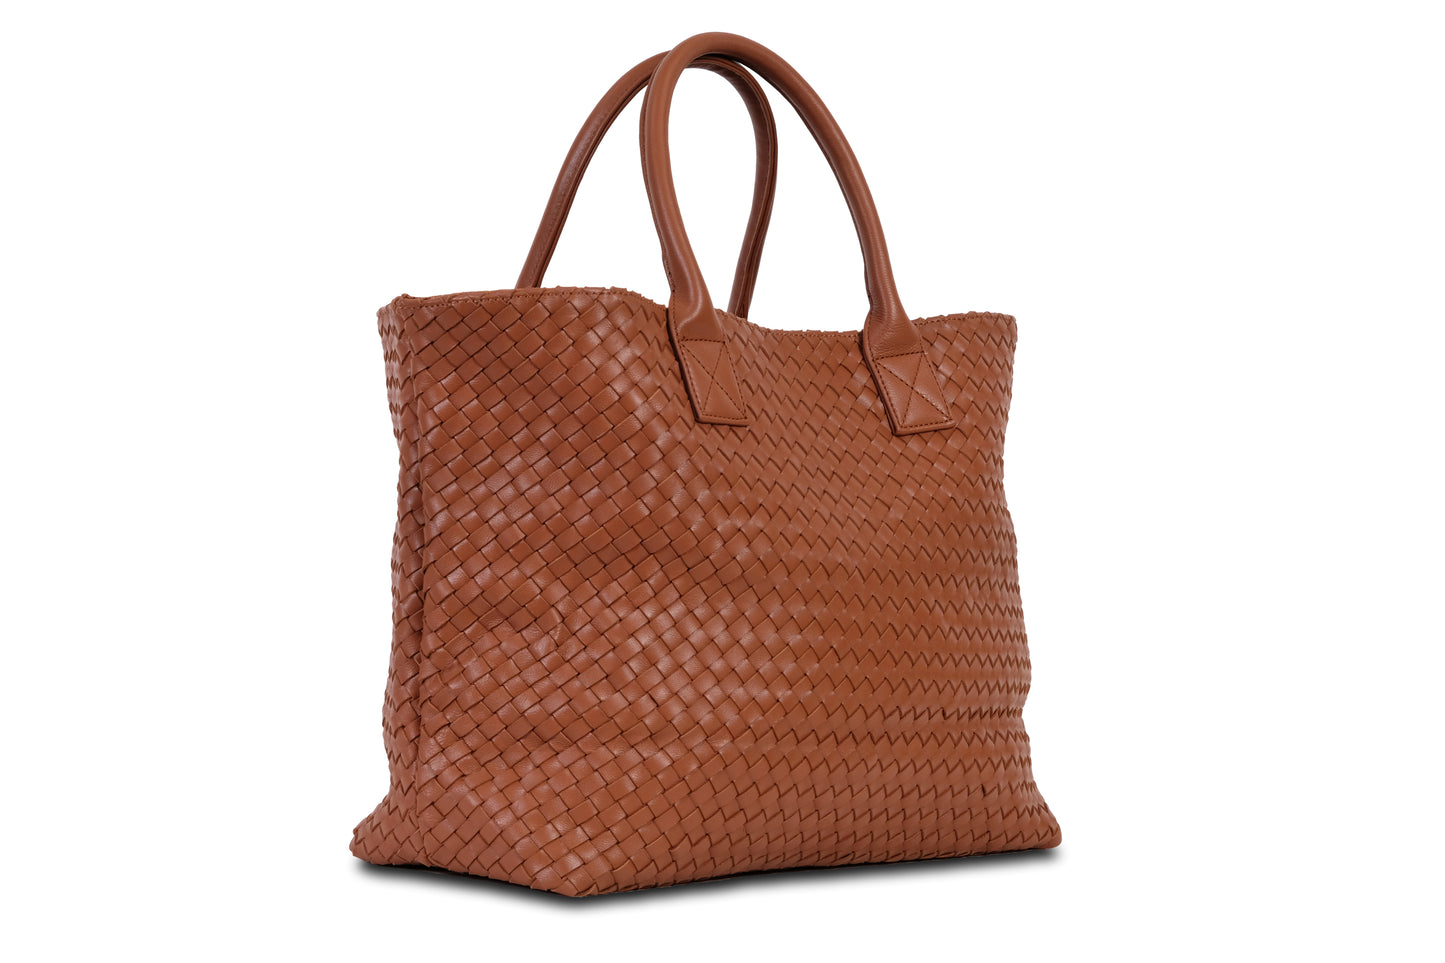 Destarina Coffee Brown Crosshatch Leather Tote Bag Handbag made by Dewi Maya side view available at the best boutique in Upstate South Carolina Spartanburg Greenville Dewi Maya Boutique